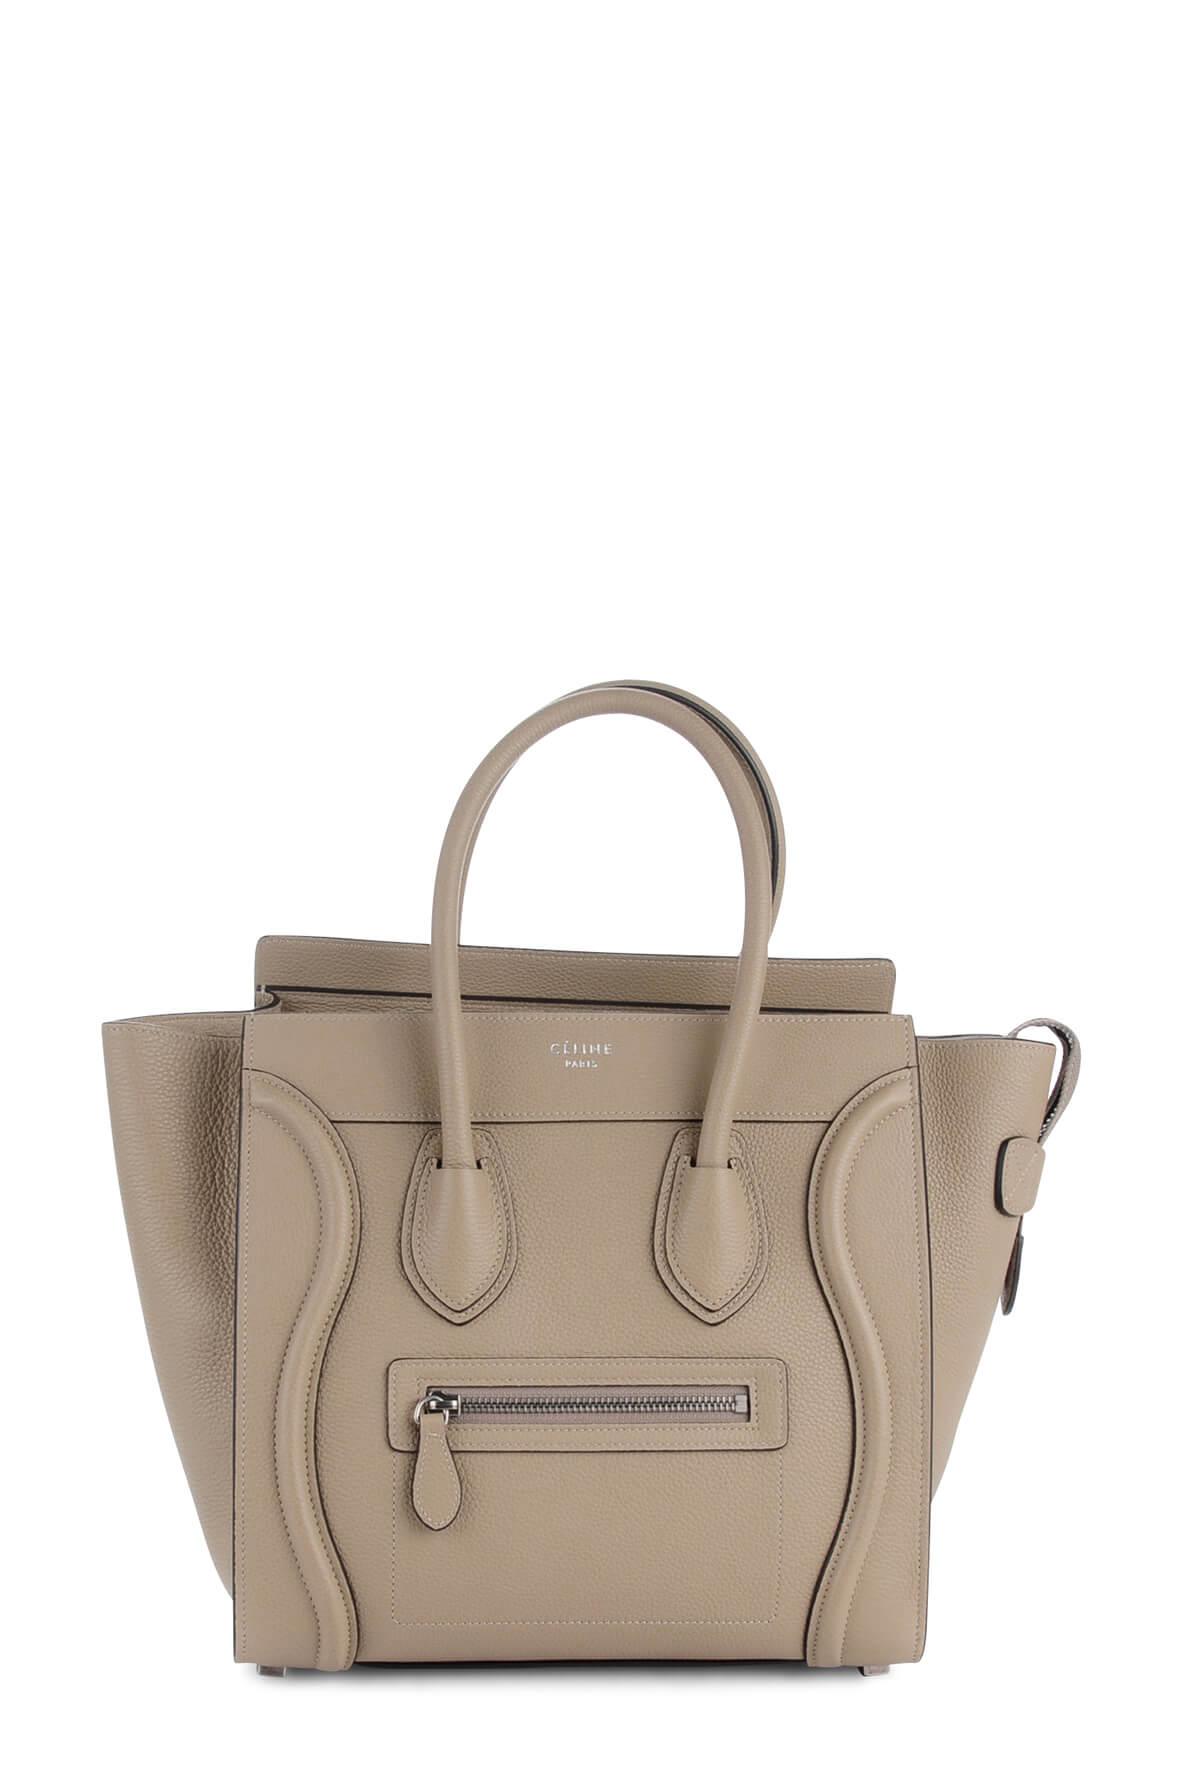 Celine Micro Luggage Taupe with Blue Piping